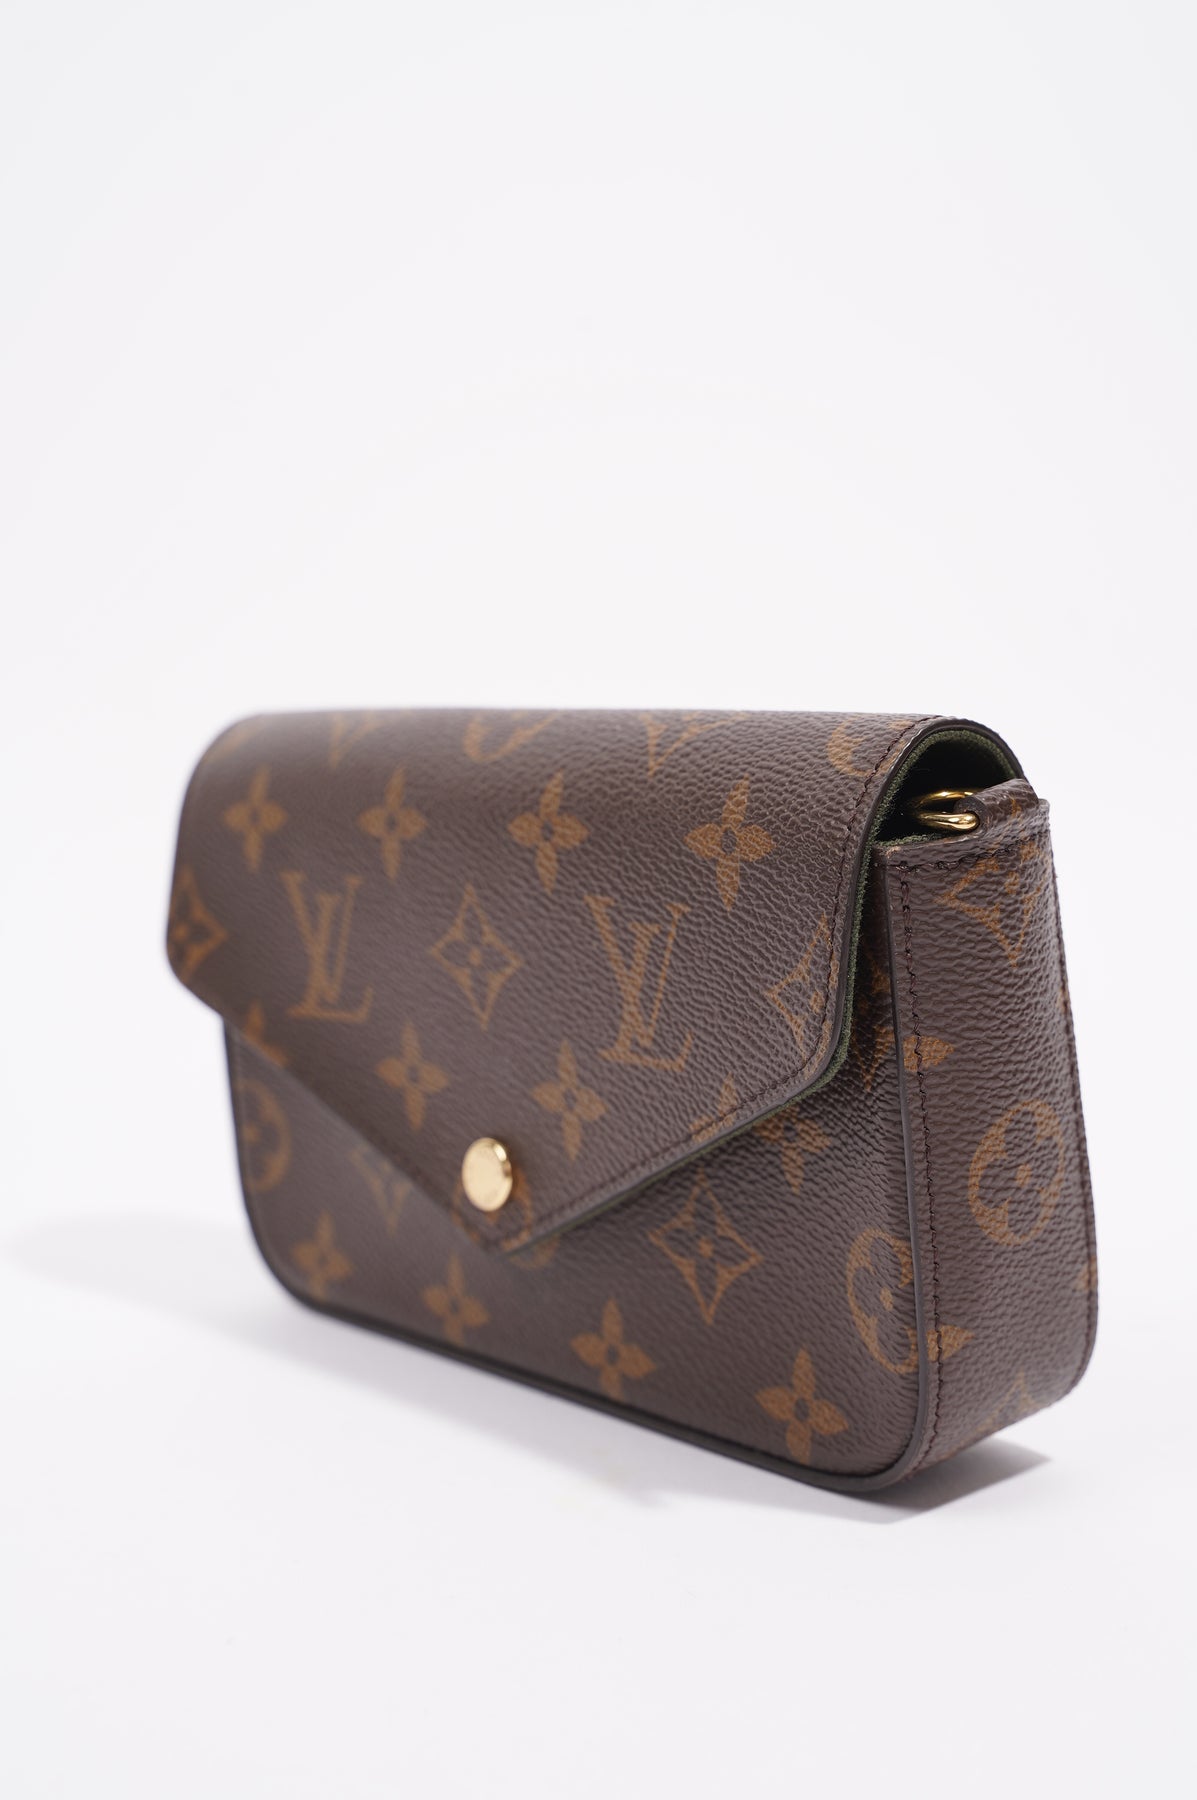 Louis Vuitton pre-owned Felicie Strap And Go bag - ShopStyle